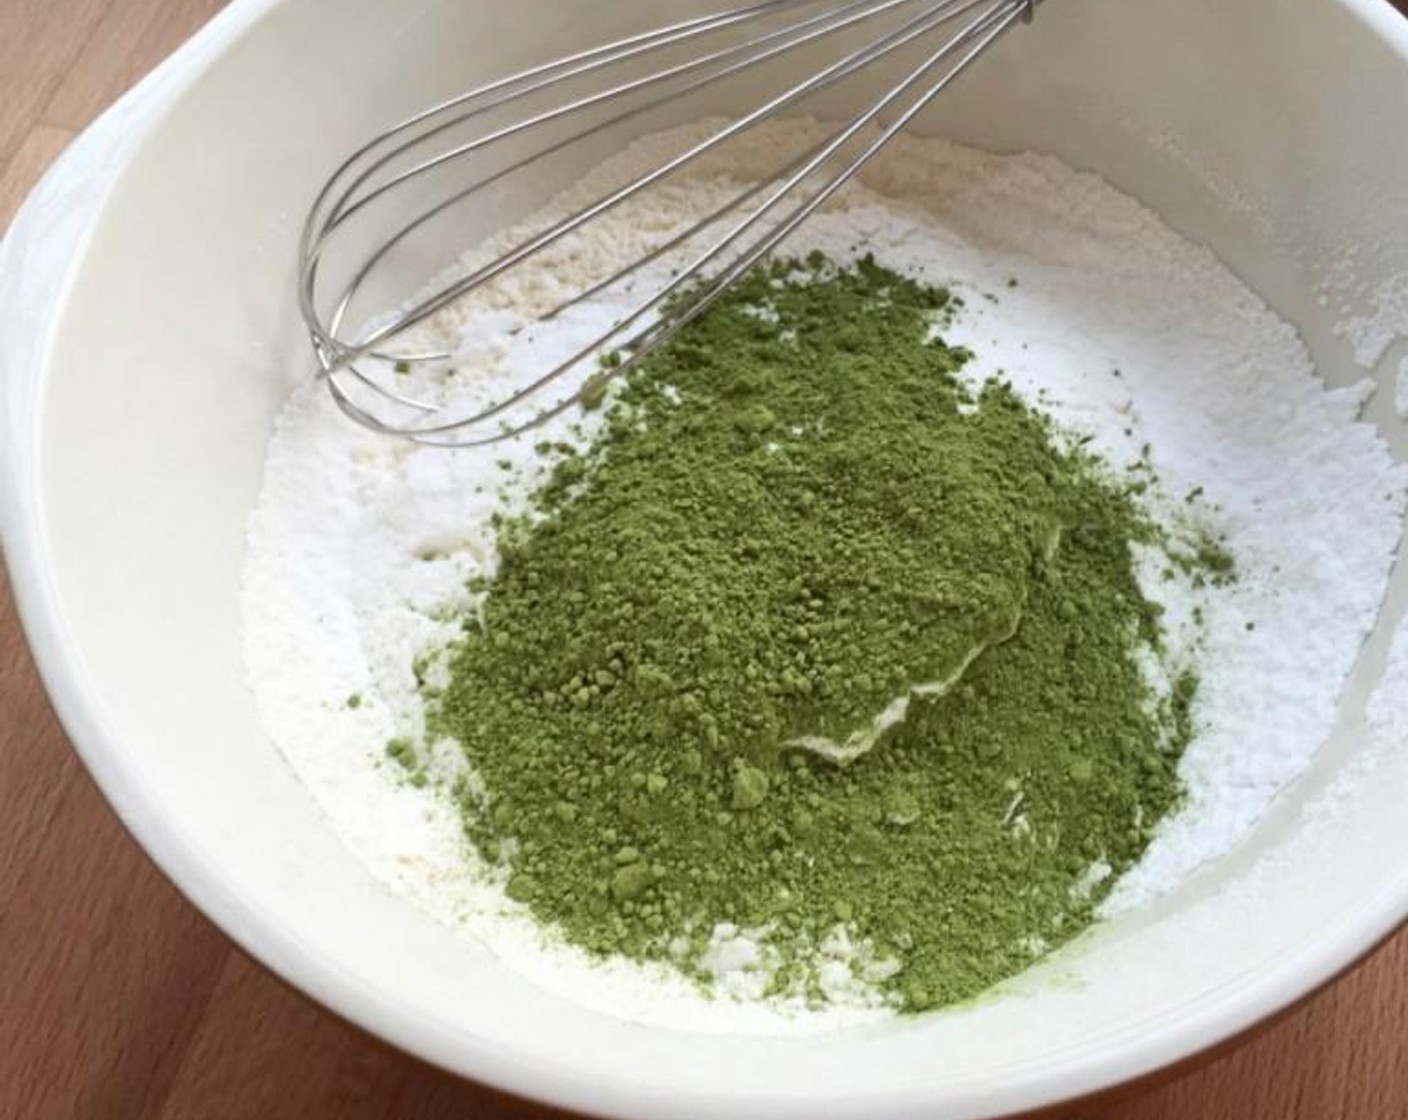 step 4 Then add in Matcha Powder (1/3 cup) and mix well to combine.